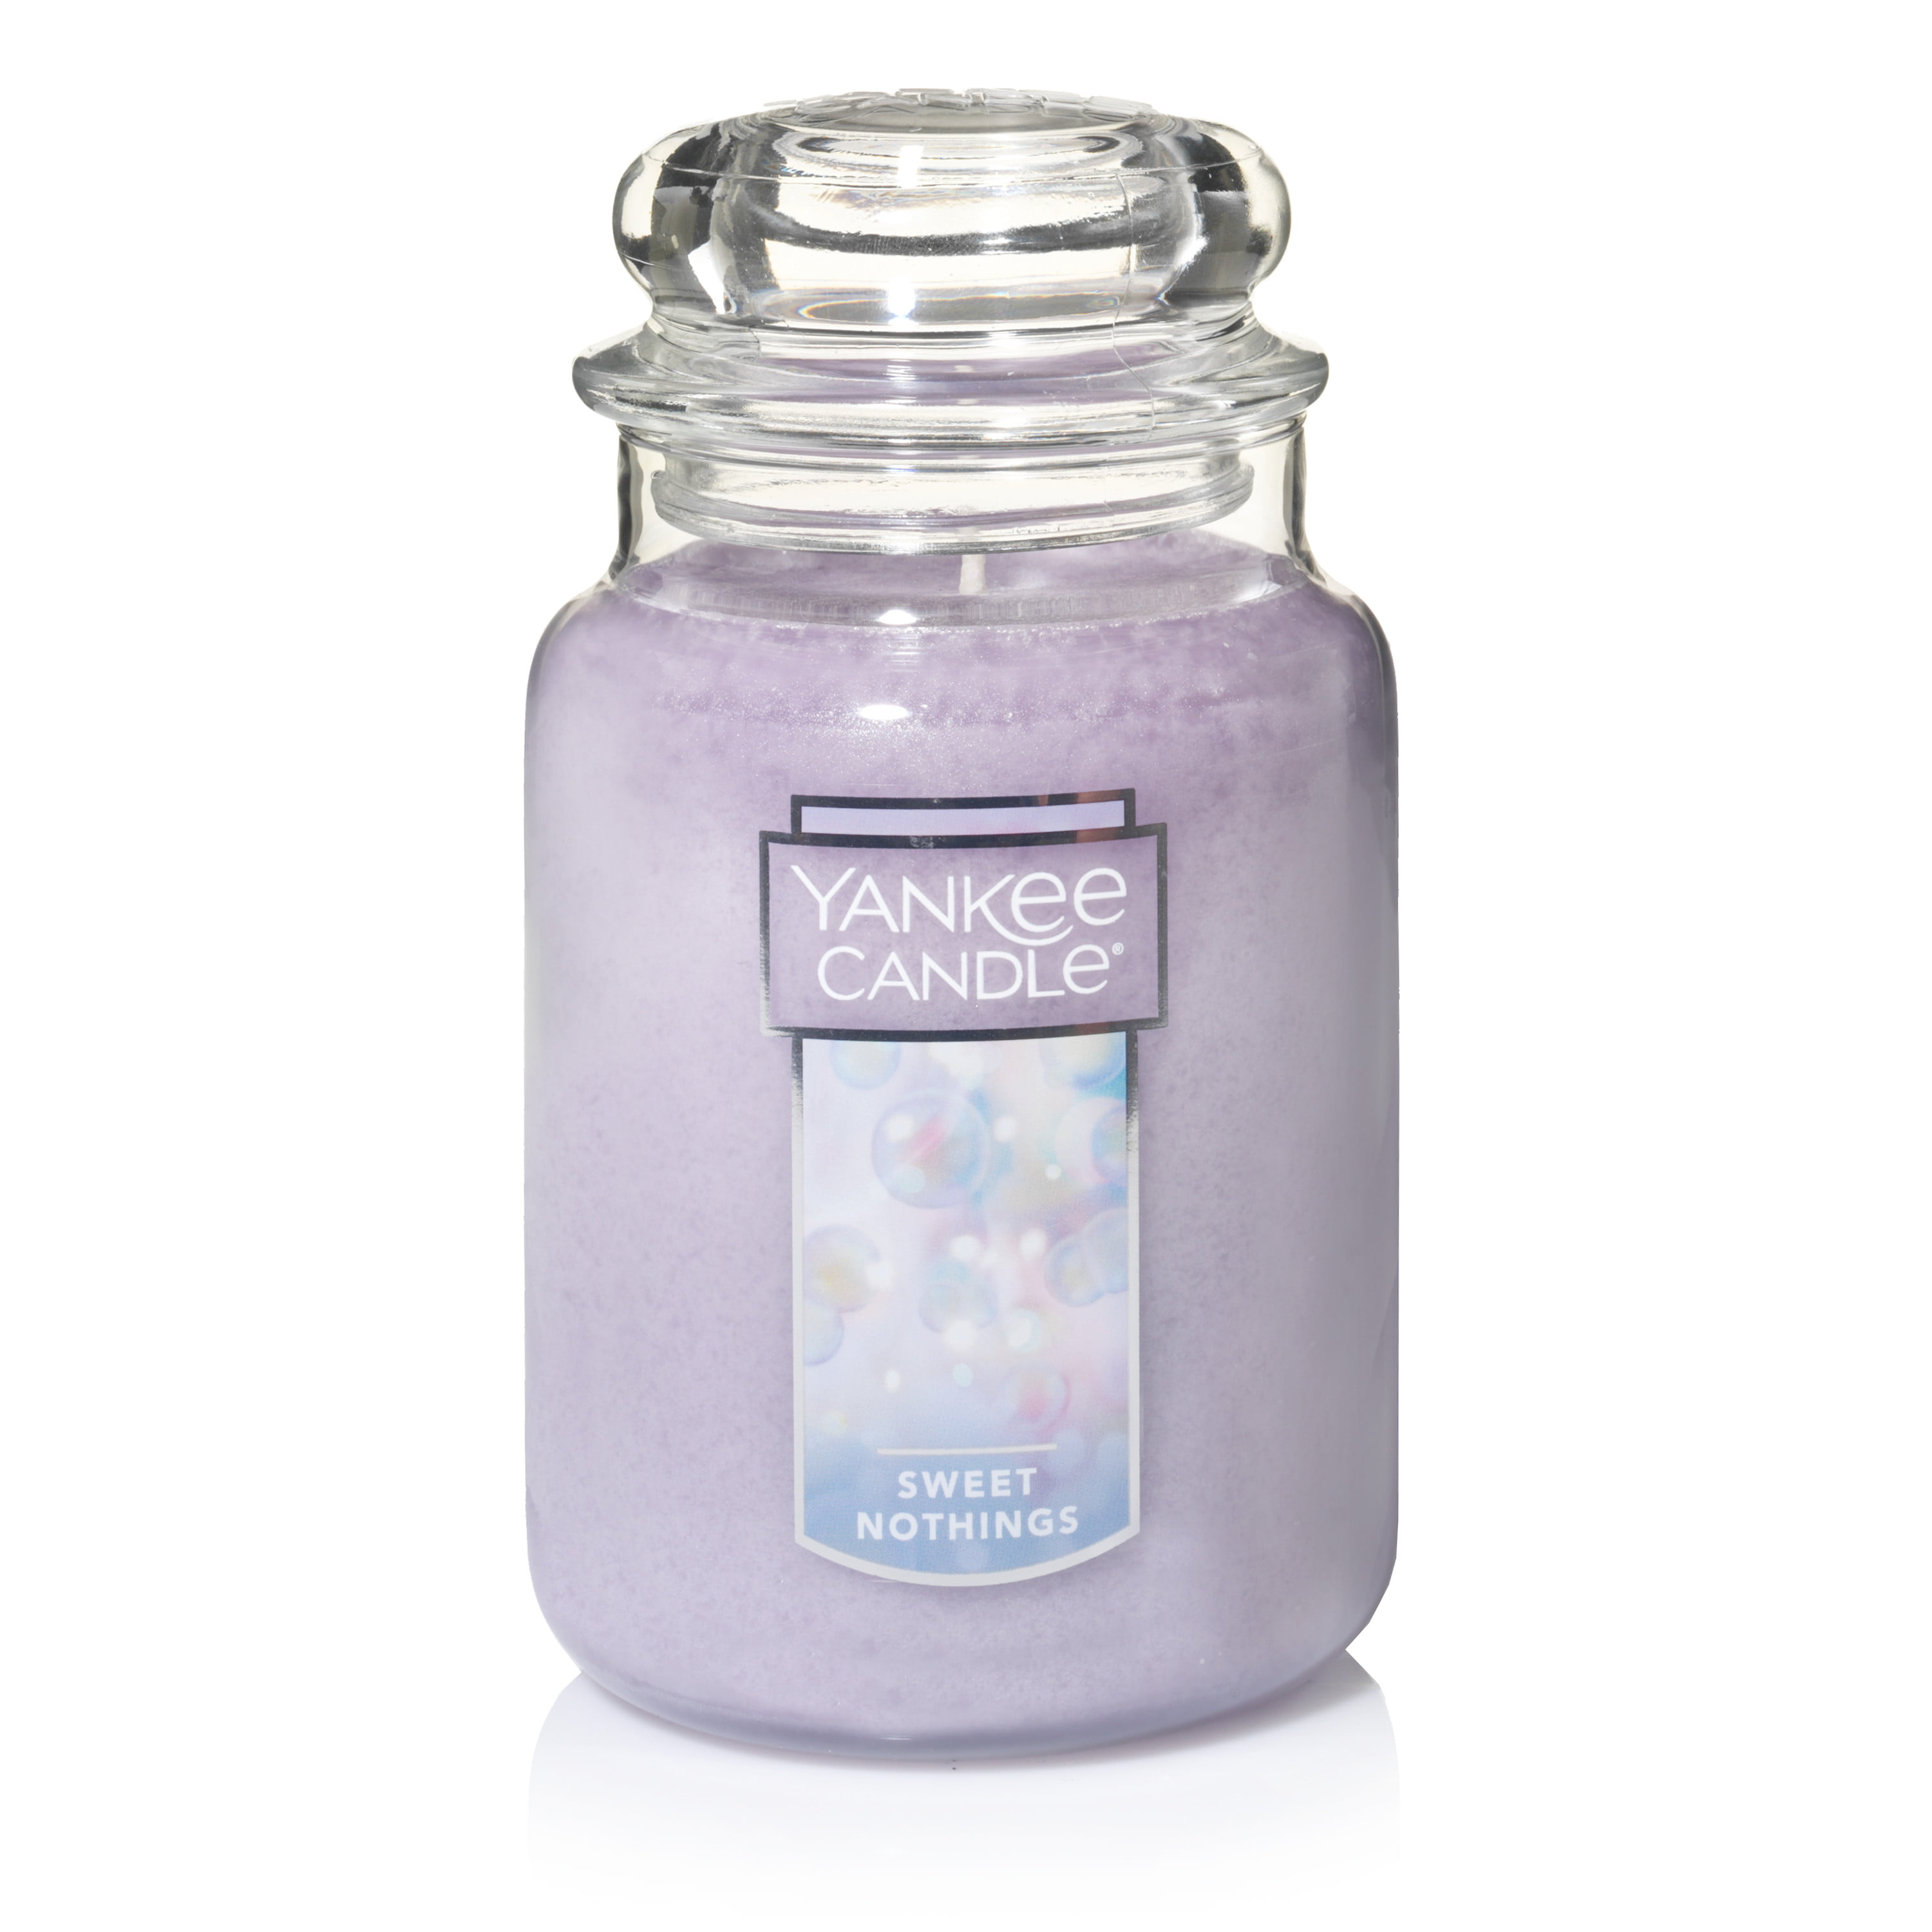 Yankee Candle Large Jar Scented Candle, Sweet Nothings - Walmart.com ...